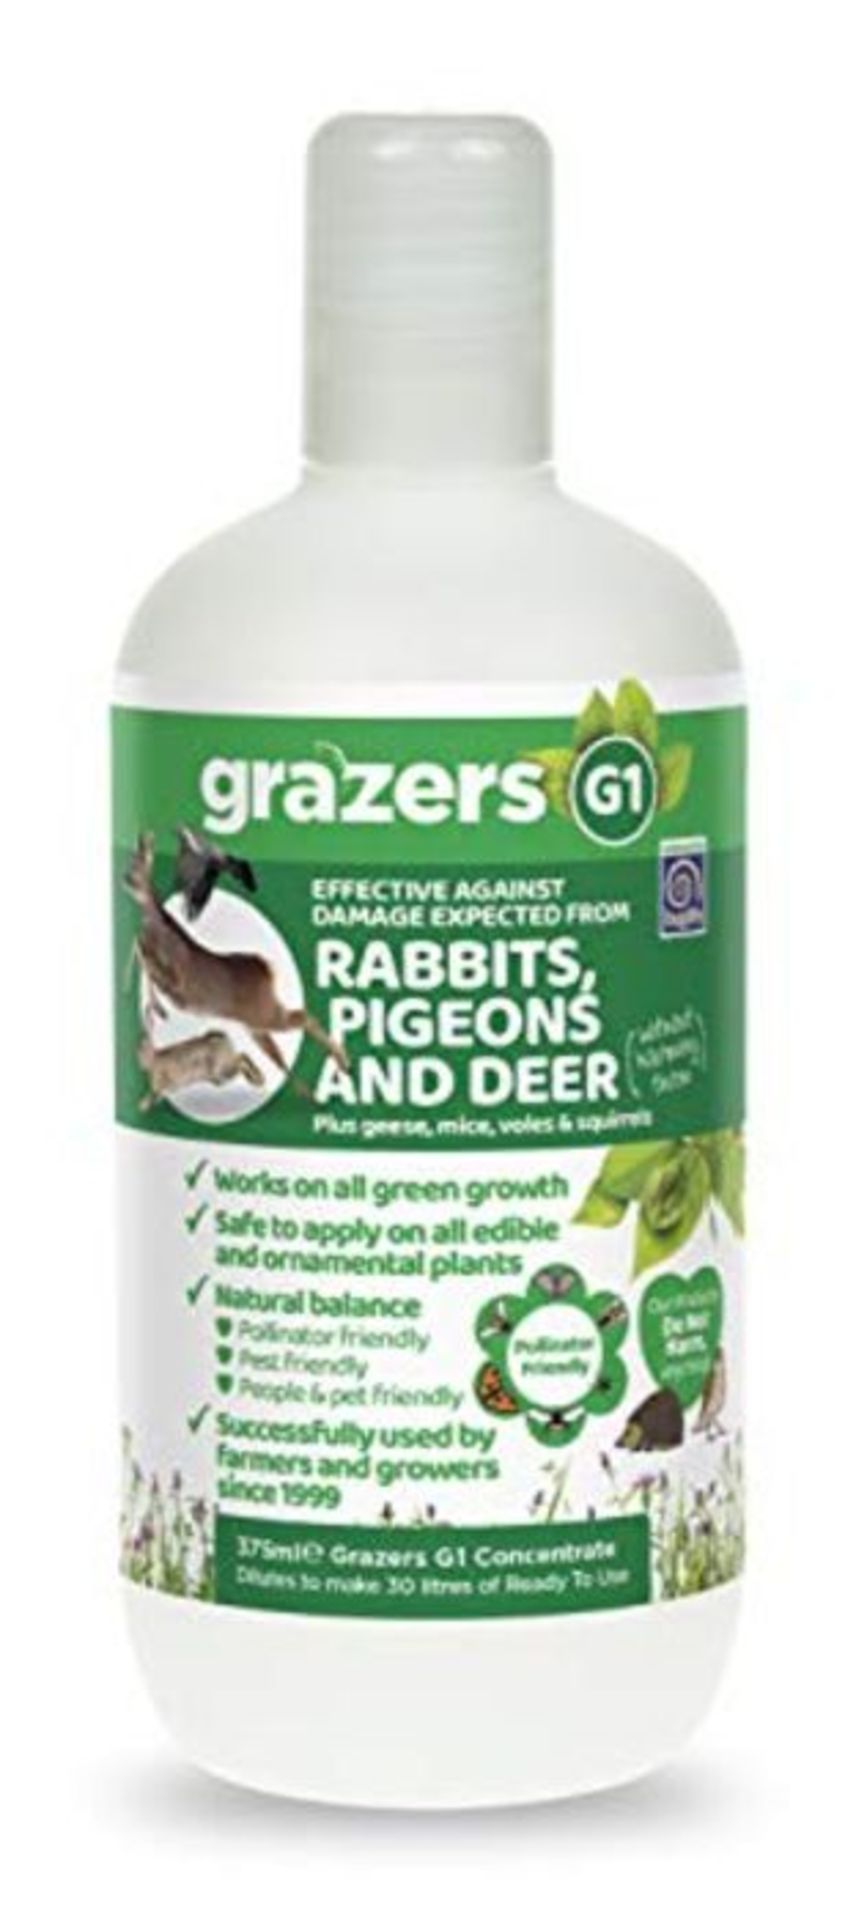 Grazers ltd GRAZERS G1 Concentrate 750ml Effective Against Damage from Rabbits, Pigeon